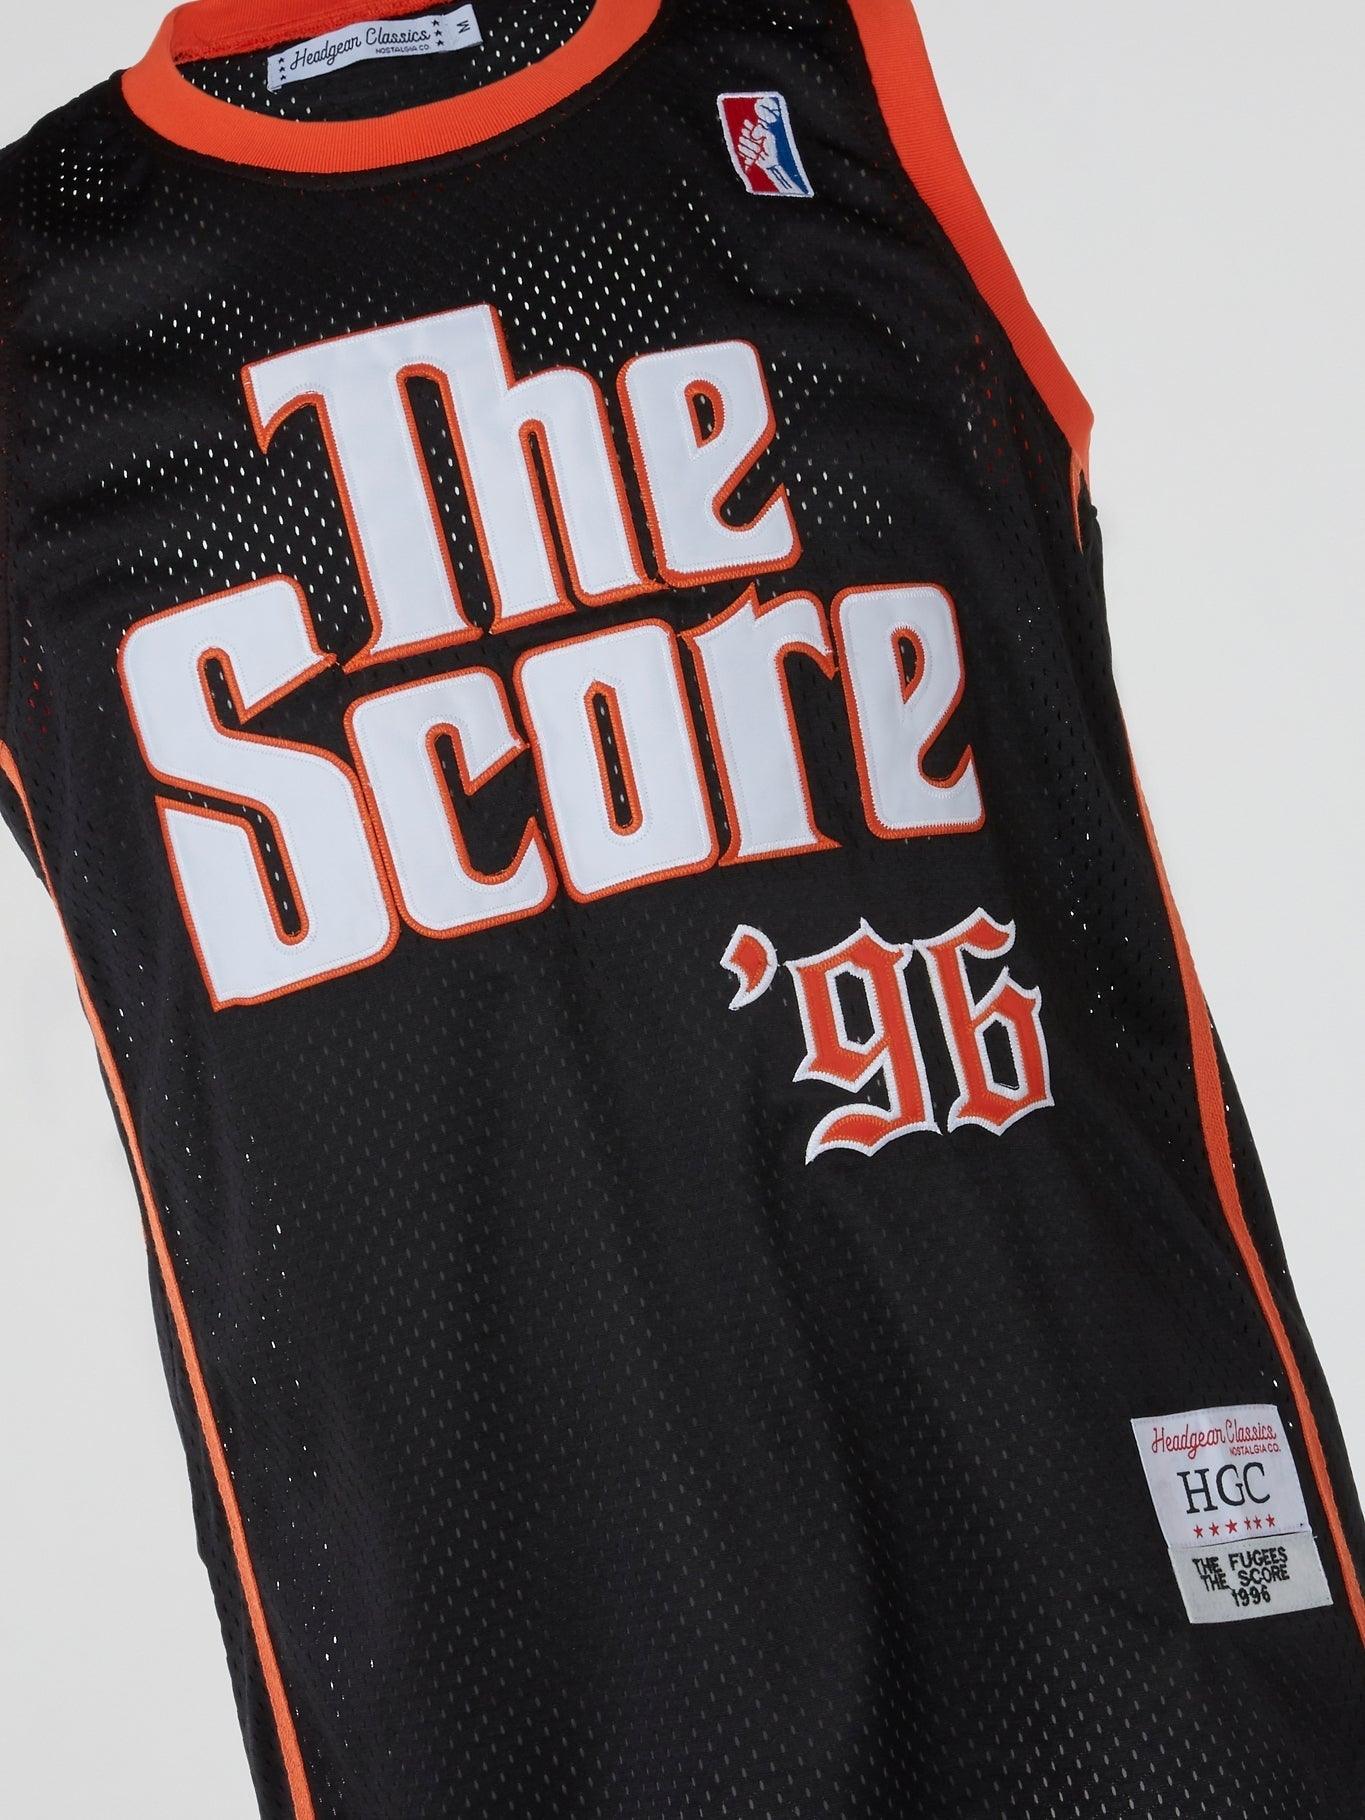 The Fugees The Score Basketball Jersey - B-Hype Society